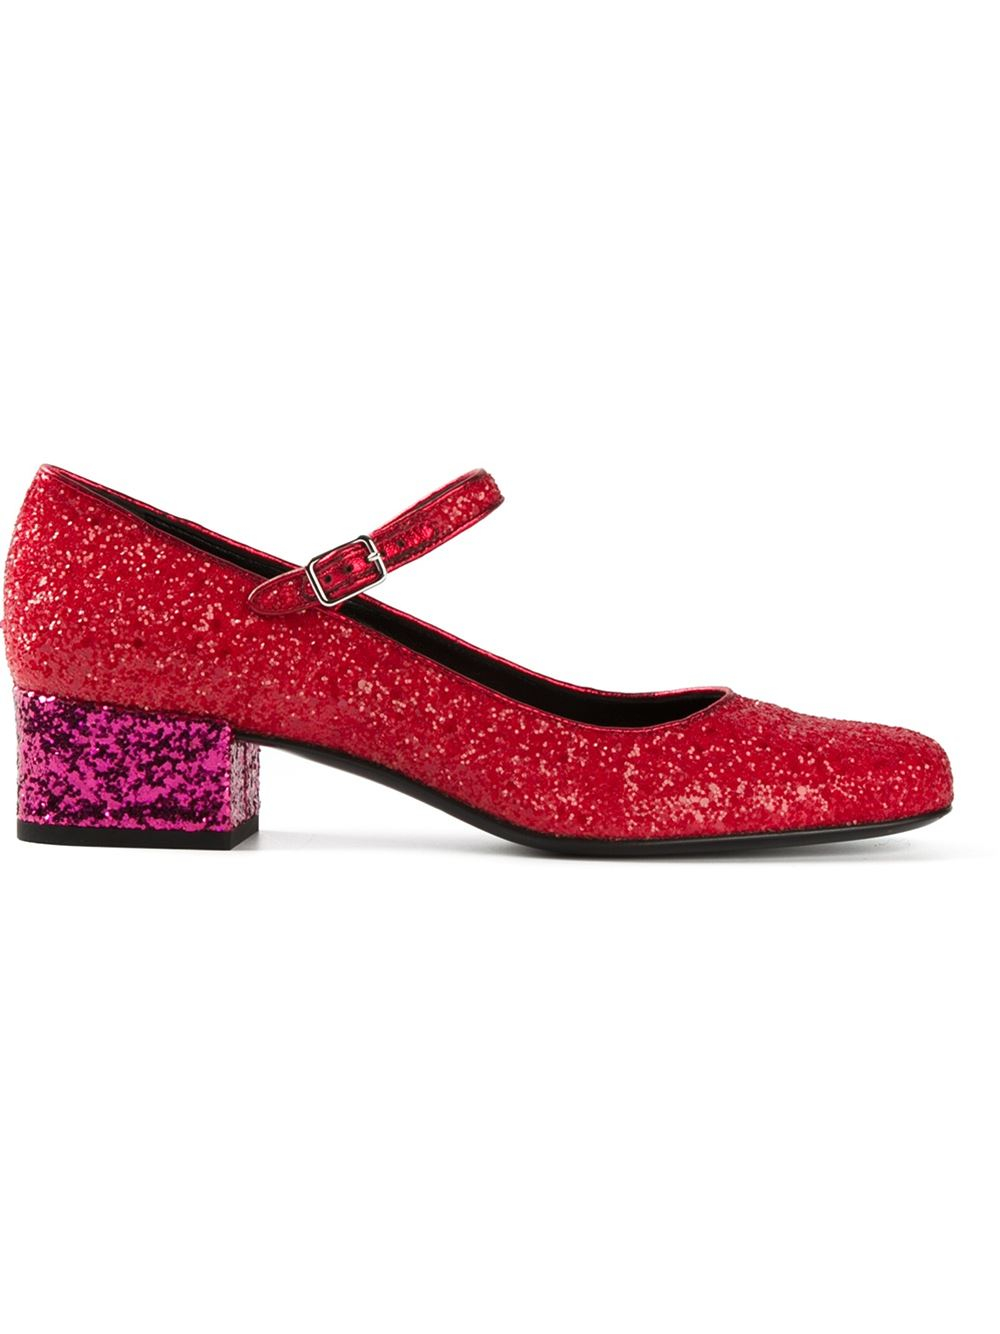 Saint Laurent 'babies' Mary Jane Shoes in Red | Lyst